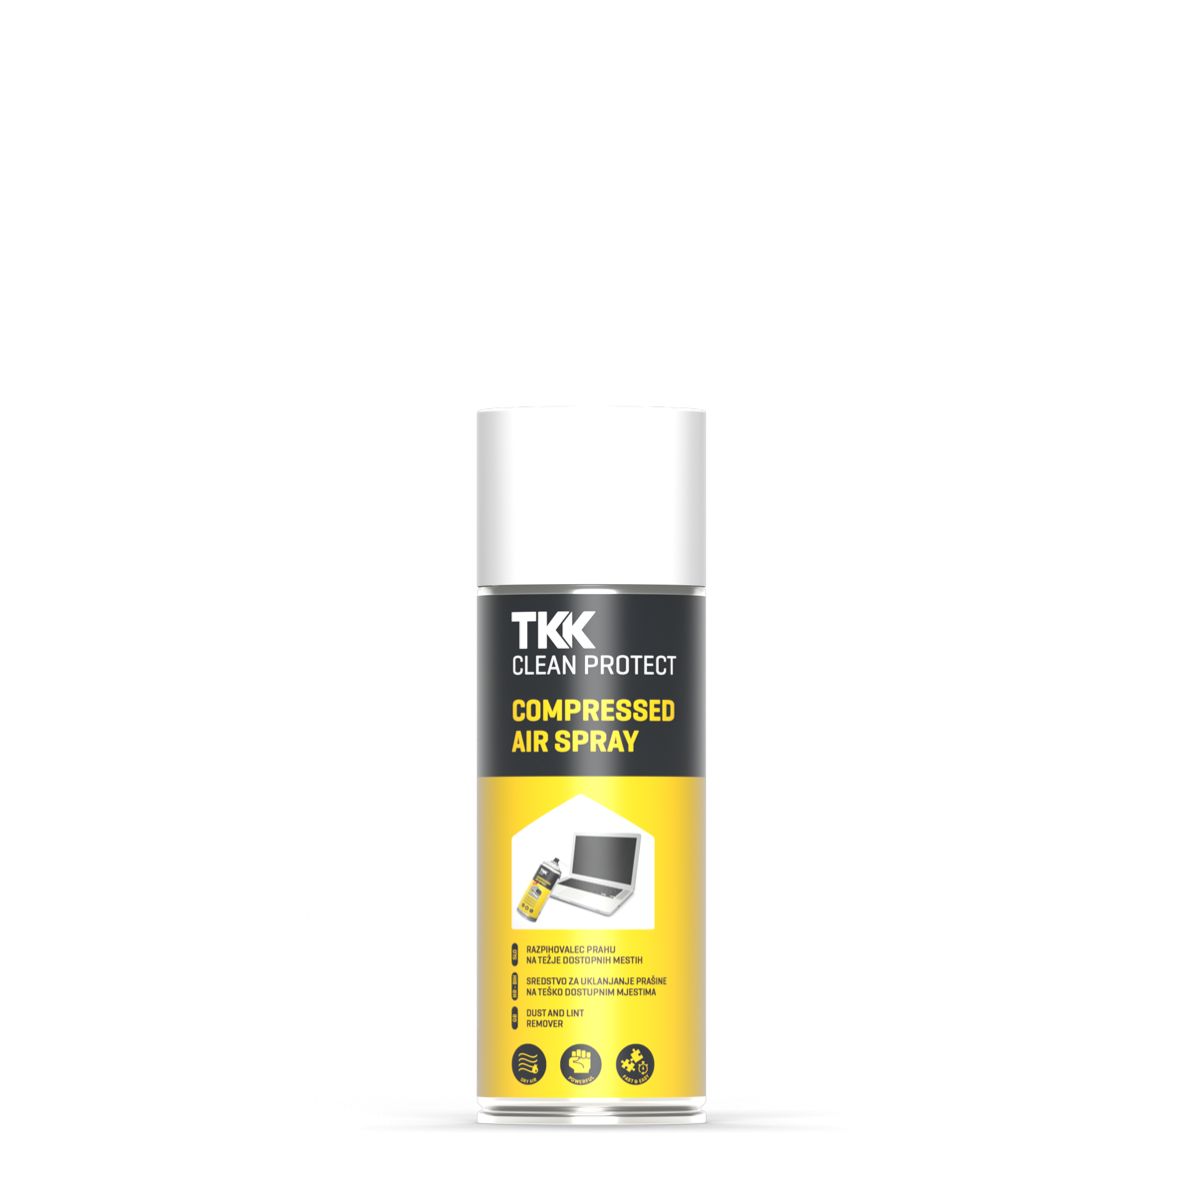 TKK Clean Protect Compressed Air Spray